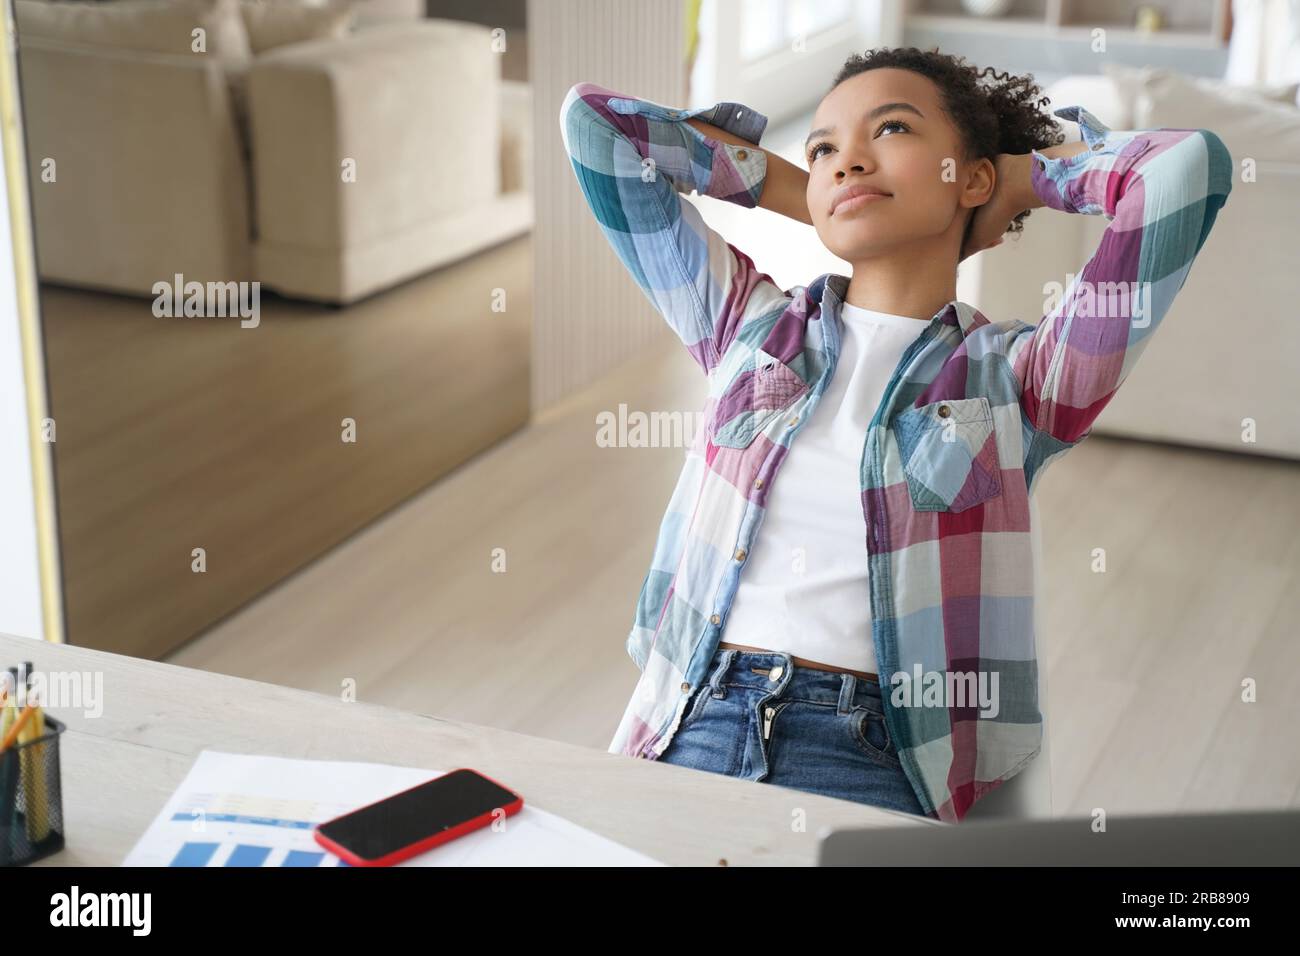 Dreamy biracial teen student takes a break from studying at home, leaning back with hands behind head, lost in thoughts. Stock Photo